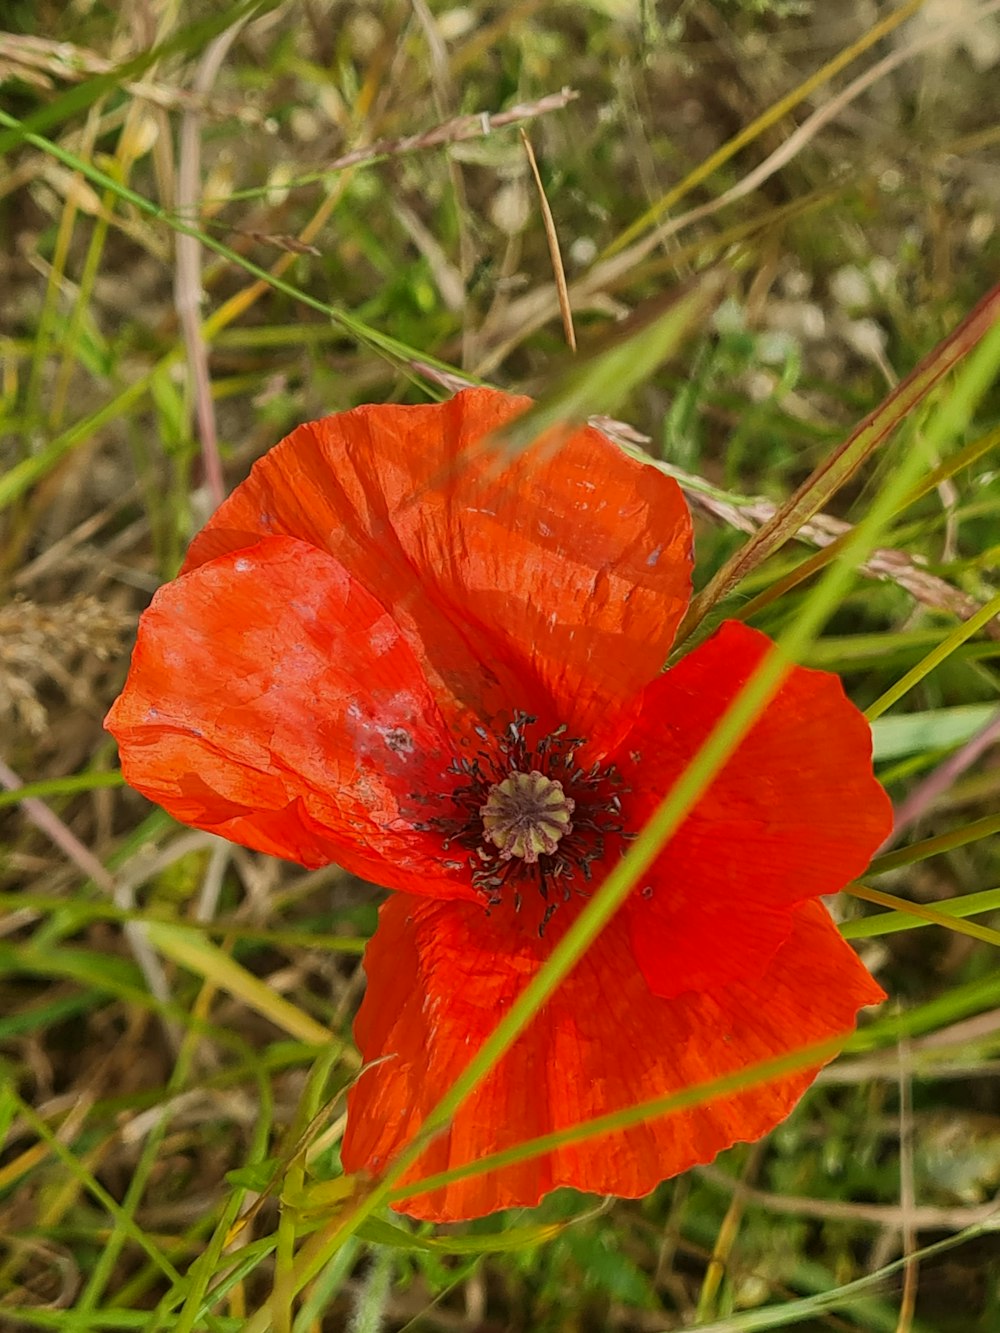 a bright red flower in a grassy field